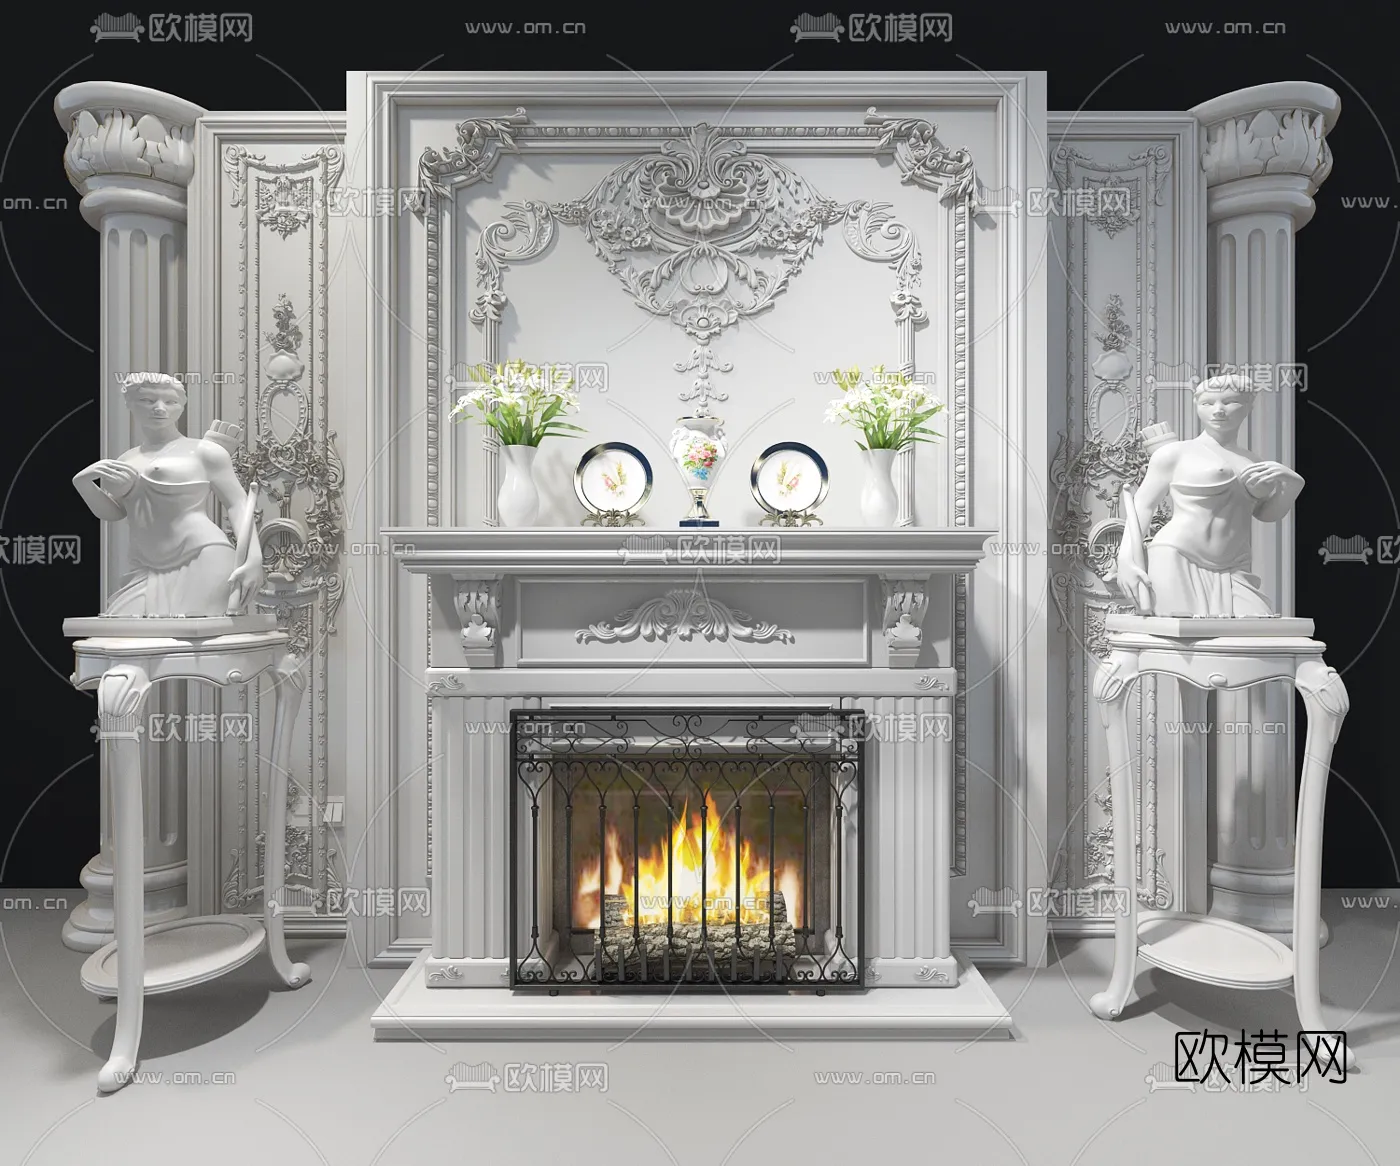 CLASSIC – FIREPLACE 3DMODELS – 050